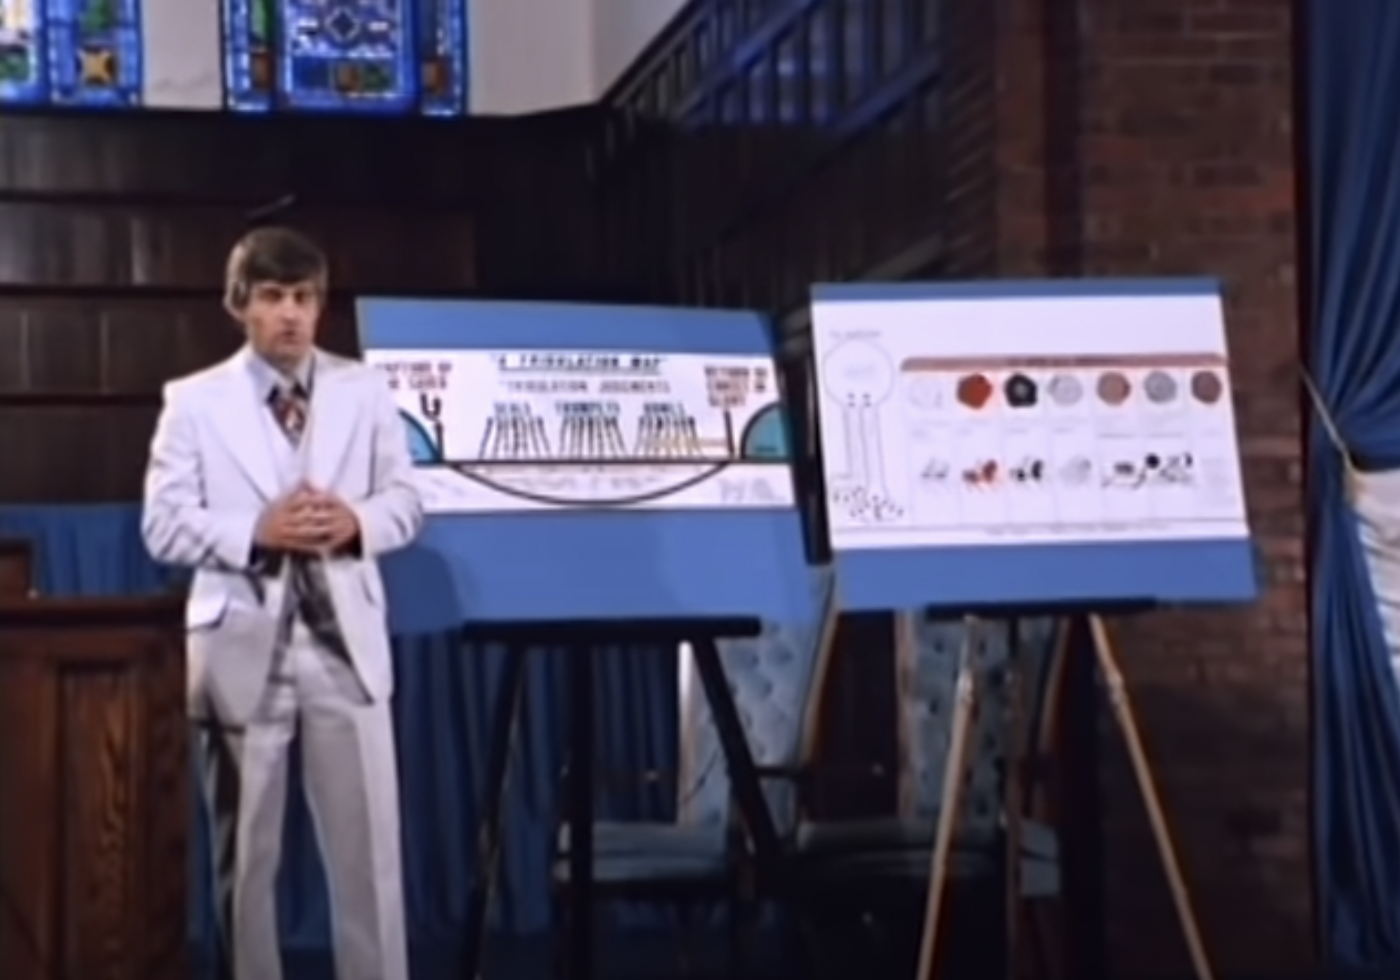 The eveangelist in a light grey suit in front of some fairly spare diagrams mounted on easels in the church.